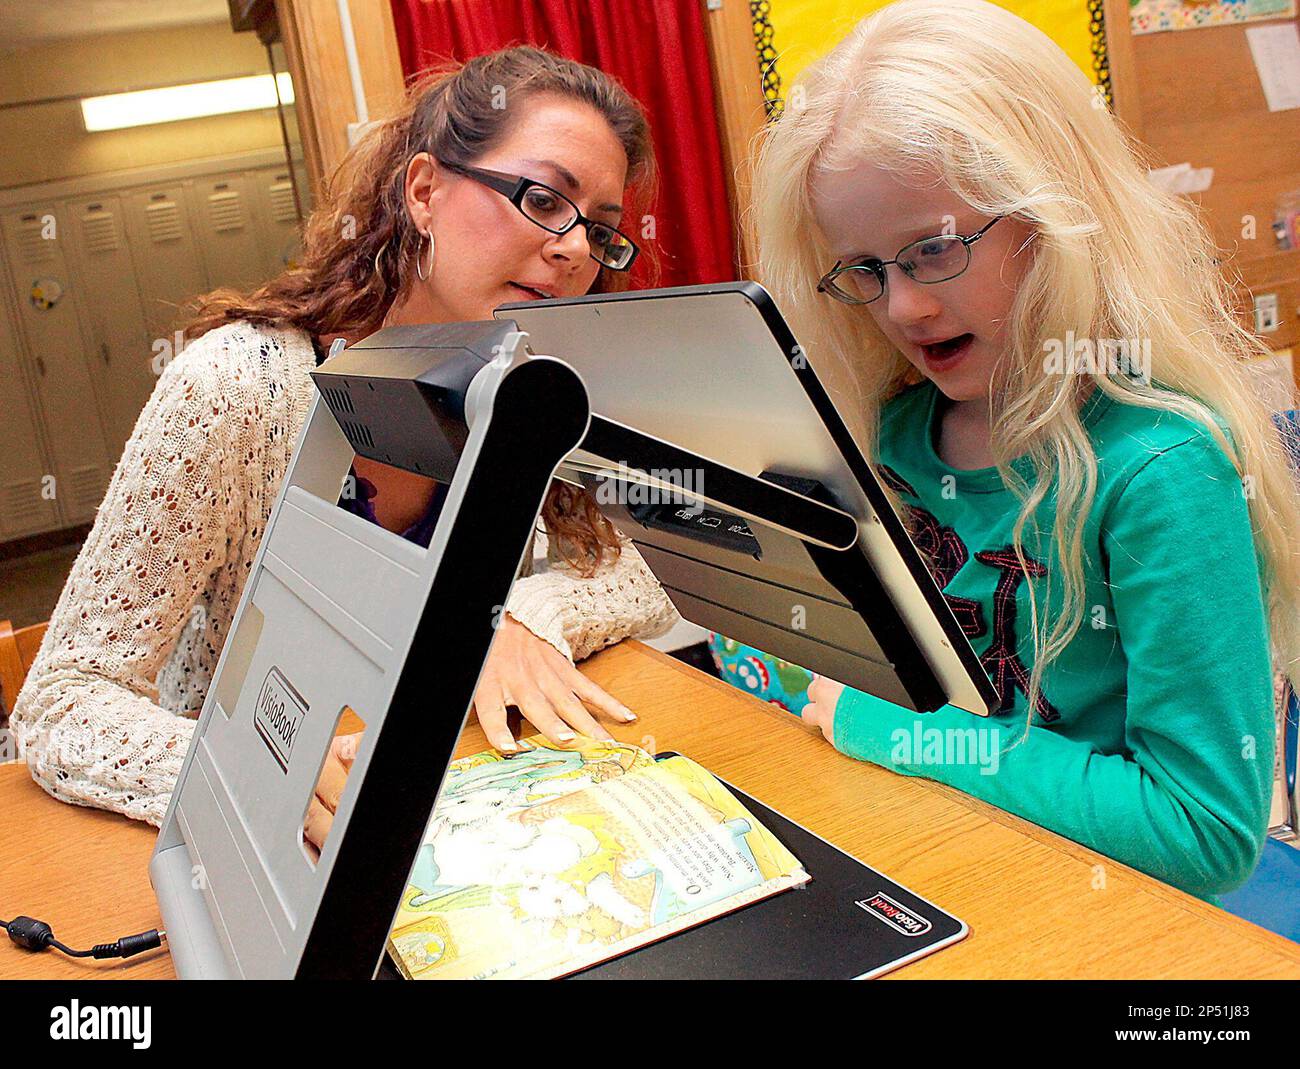 https://c8.alamy.com/comp/2P51J83/advance-for-monday-oct-28-in-an-oct-15-2013-photo-lisa-pelc-hillsdale-isd-visually-impaired-teacher-consultant-works-with-gier-elementary-first-grader-alexis-nichols-as-she-reads-with-a-visiobook-at-the-school-in-hillsdale-mich-the-device-magnifies-the-text-of-the-book-helping-nichols-read-as-a-baby-nichols-was-diagnosed-with-albinism-which-has-caused-vision-problems-for-her-her-vision-problems-arent-curable-with-glasses-or-surgery-ap-photohillsdale-daily-news-andy-barrand-2P51J83.jpg